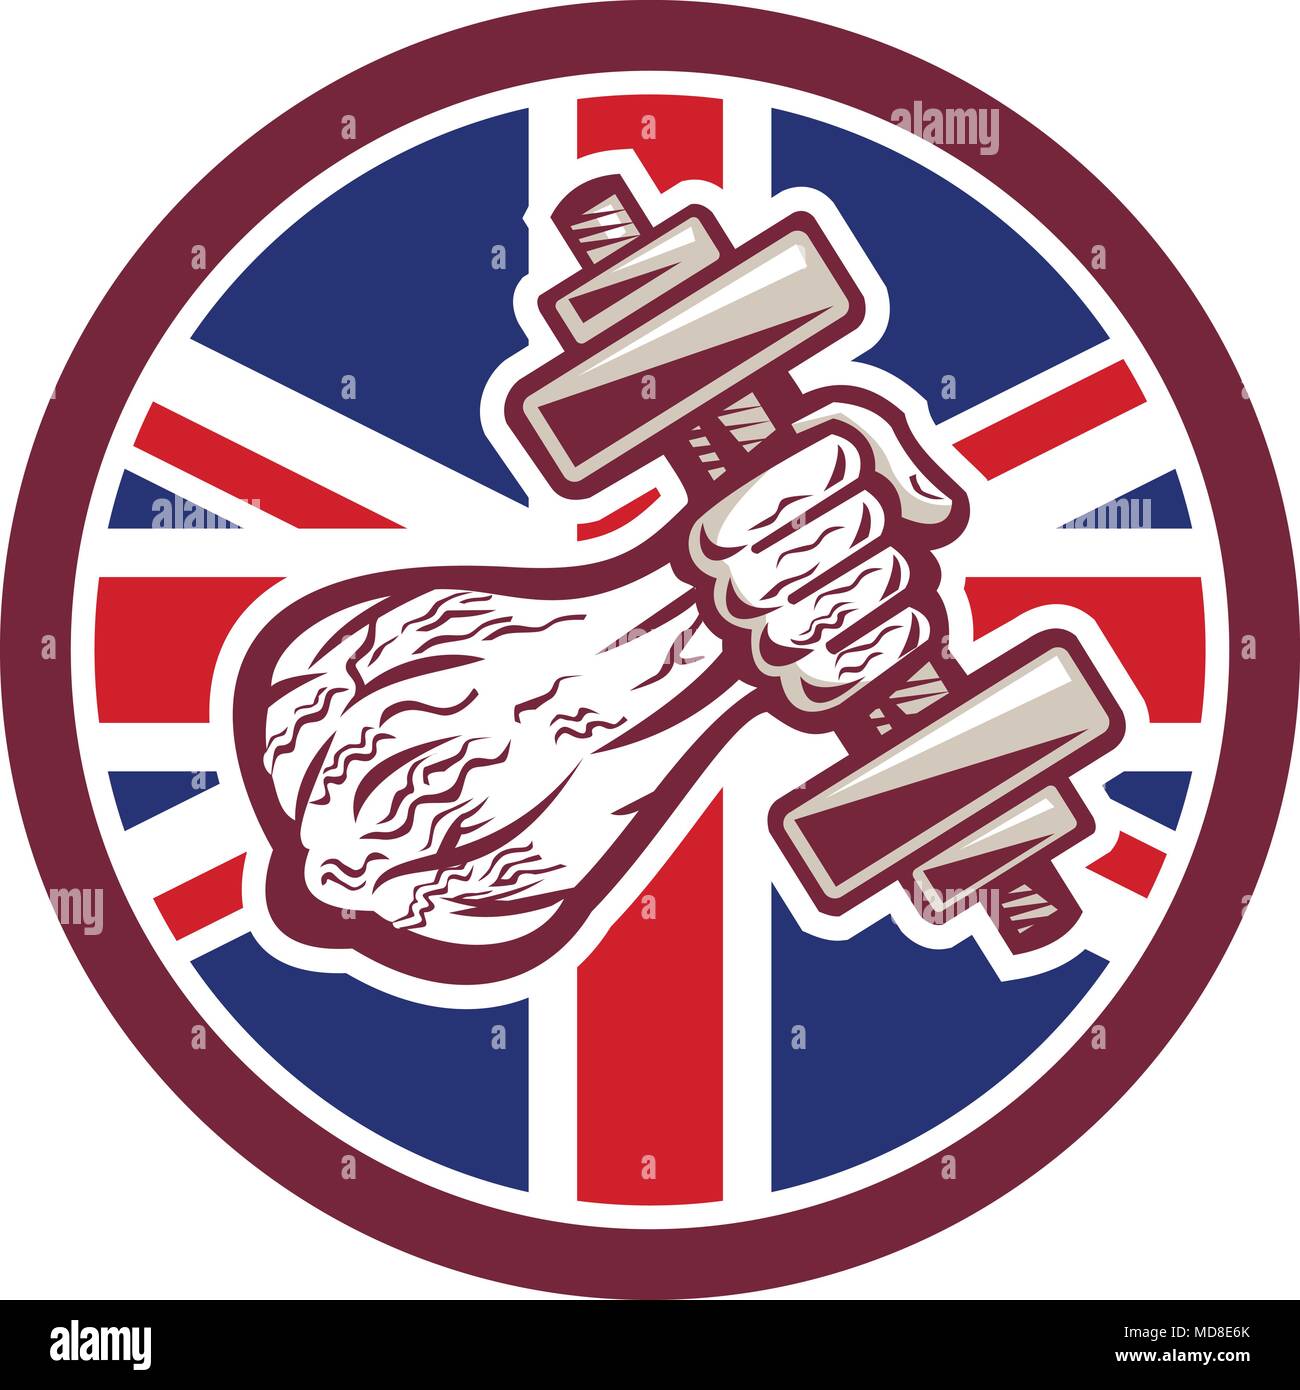 Icon retro style illustration of a British personal trainer ripped hand lifting a dumbbell with United Kingdom UK, Great Britain Union Jack flag set i Stock Vector